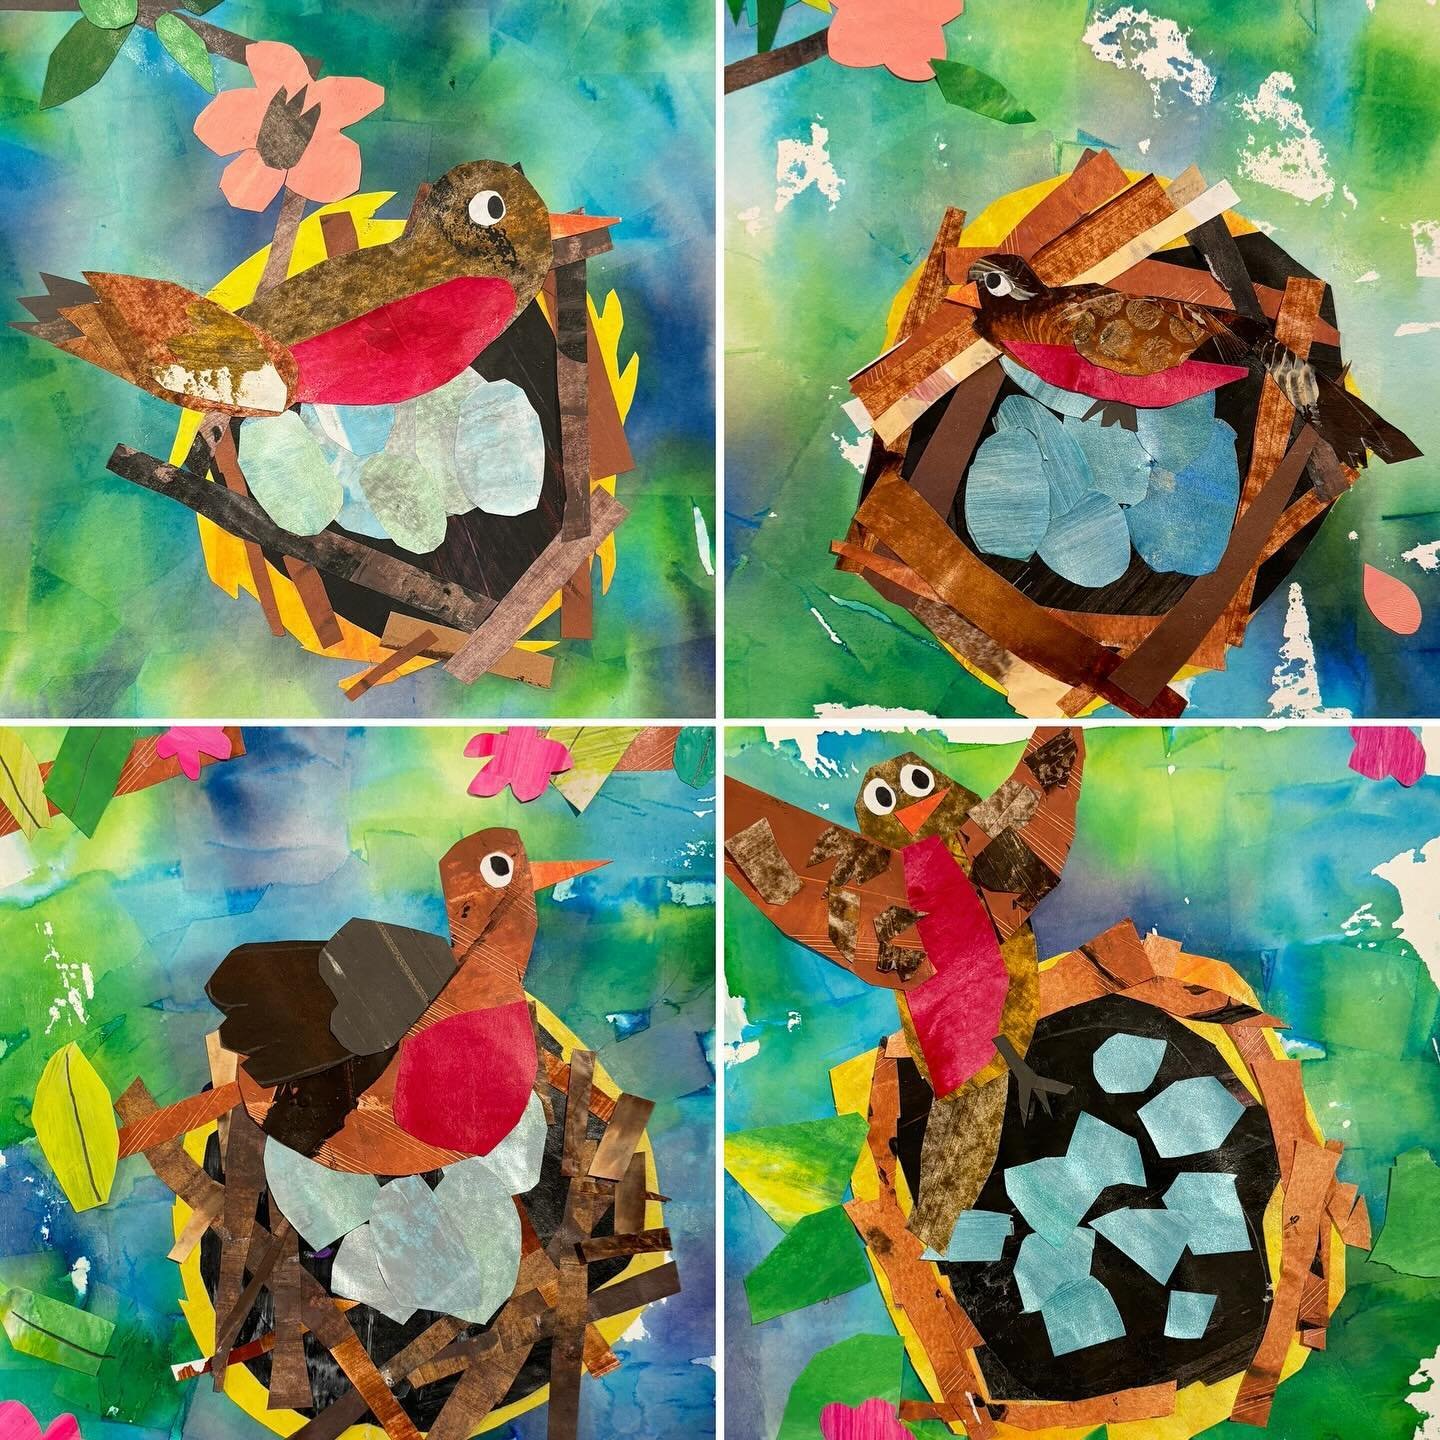 Here in Toronto, the sight of the first spring robin is always a welcome event. Robins are migratory in Canada, and their return each spring signals an end to winter. This week, our Wednesday #ArtExplorations class put the finishing touches on their 